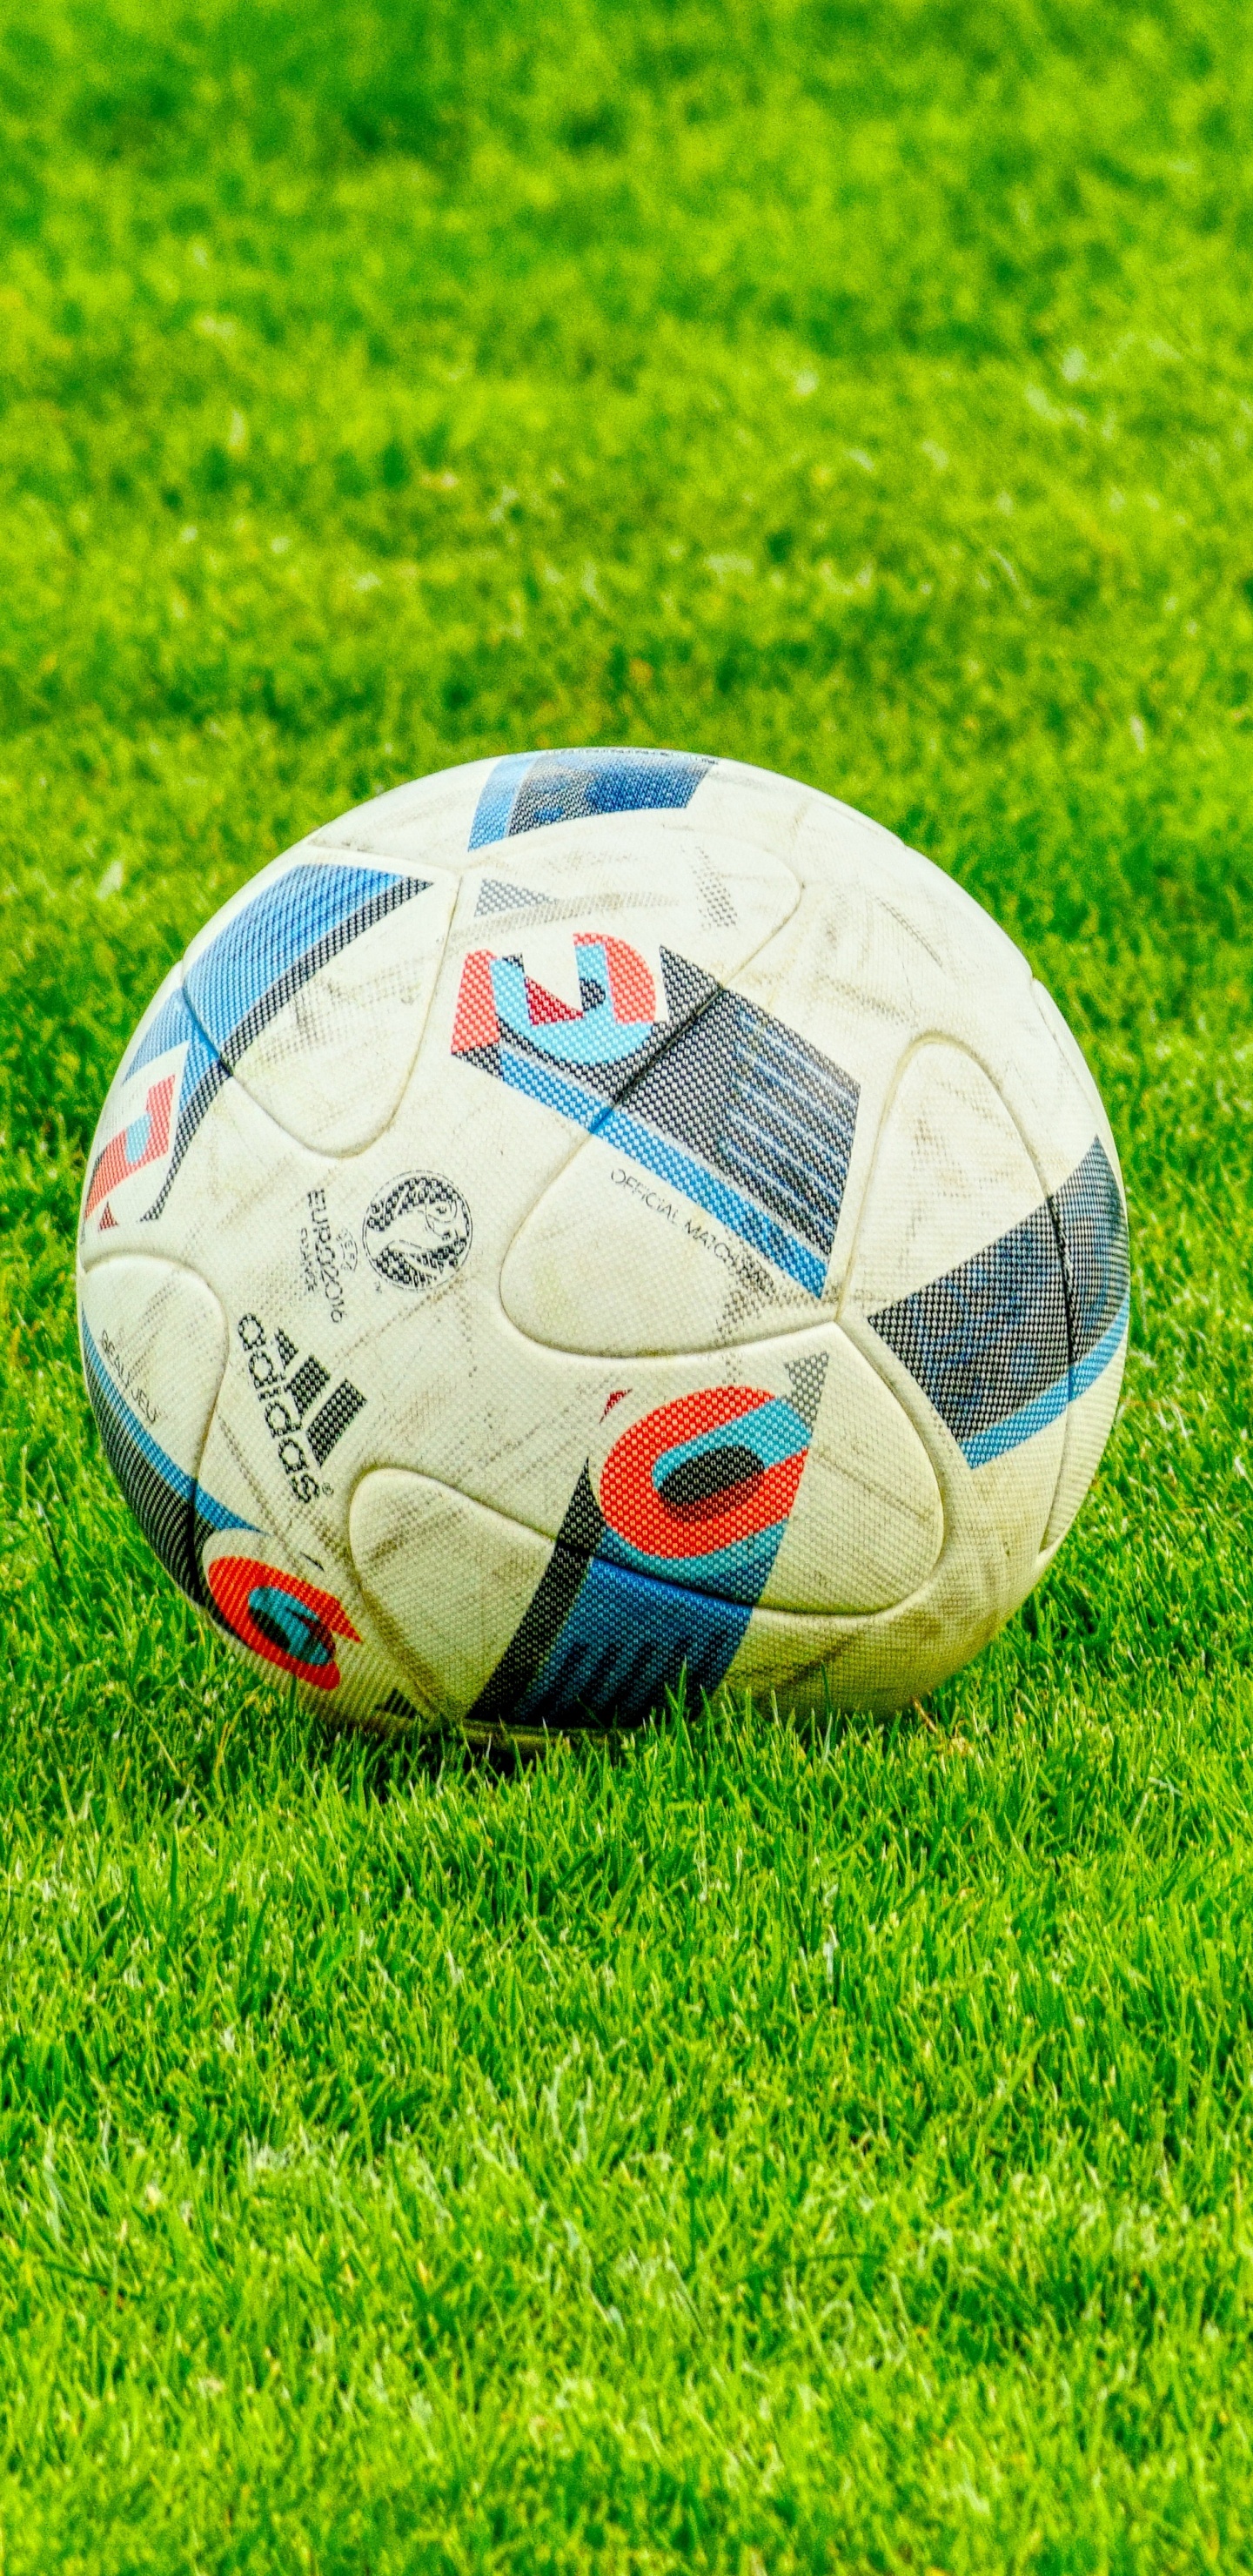 White Soccer Ball on Green Grass Field During Daytime. Wallpaper in 1440x2960 Resolution